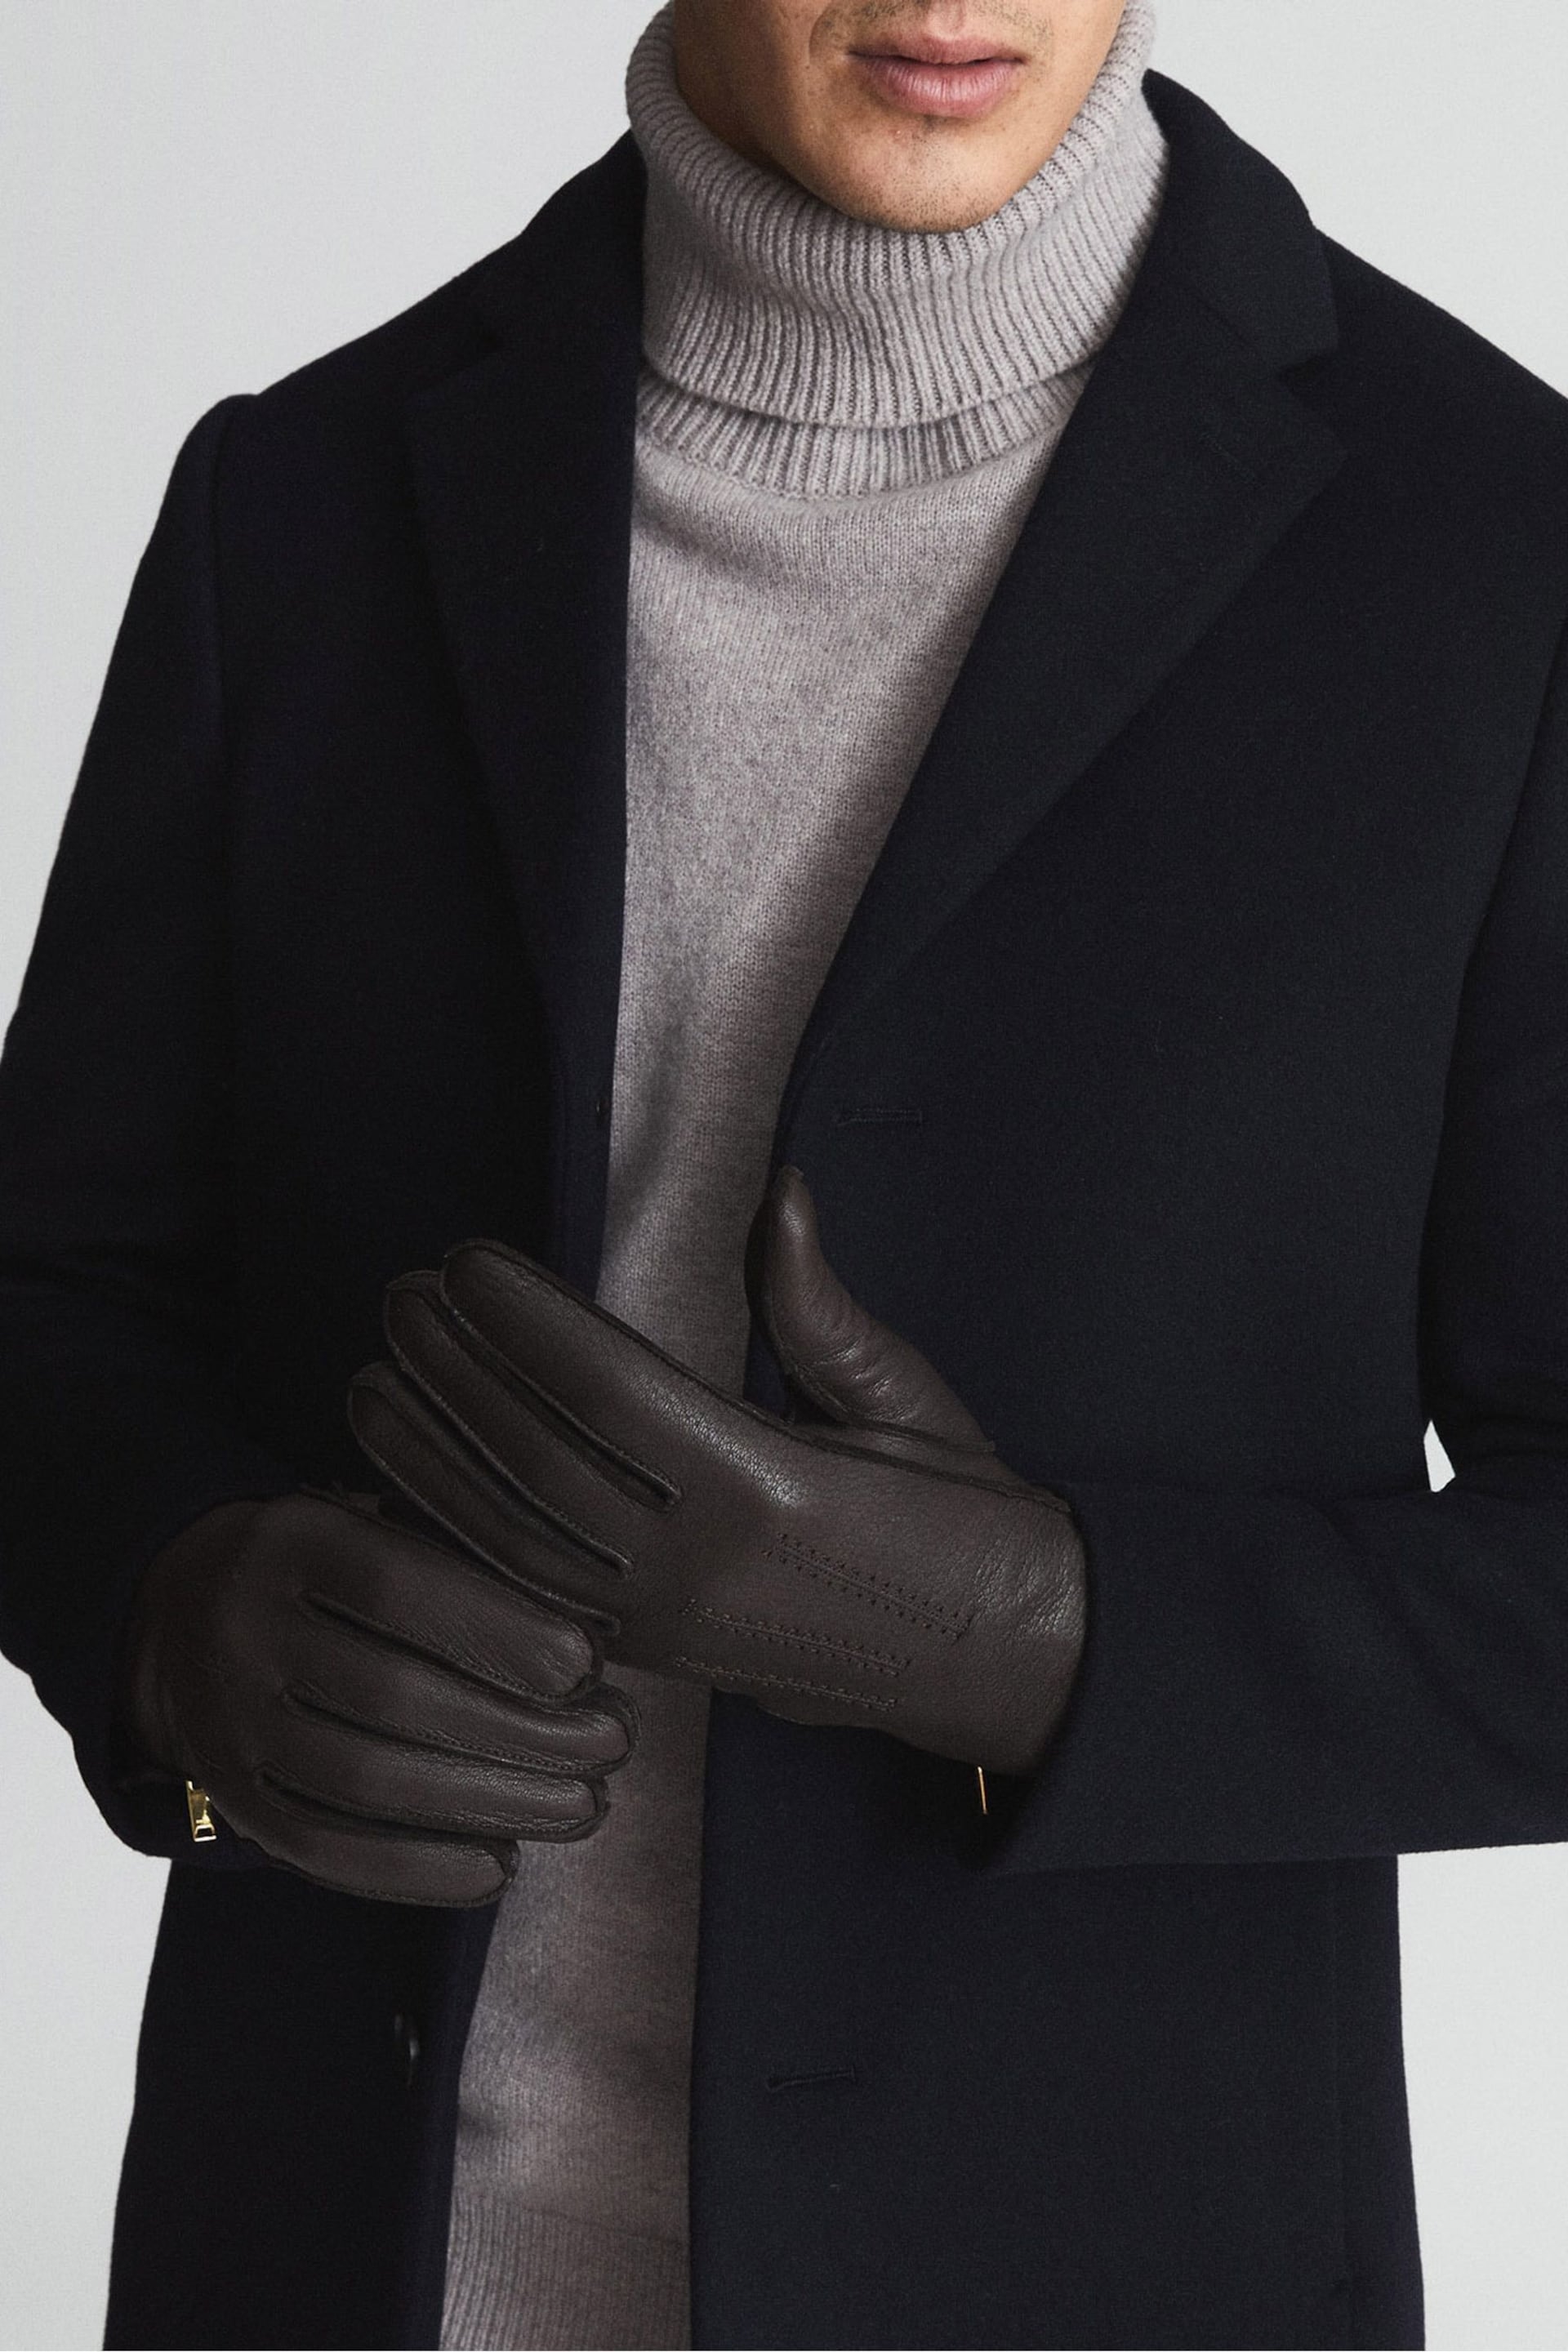 Reiss Chocolate Iowa Leather Gloves - Image 2 of 4